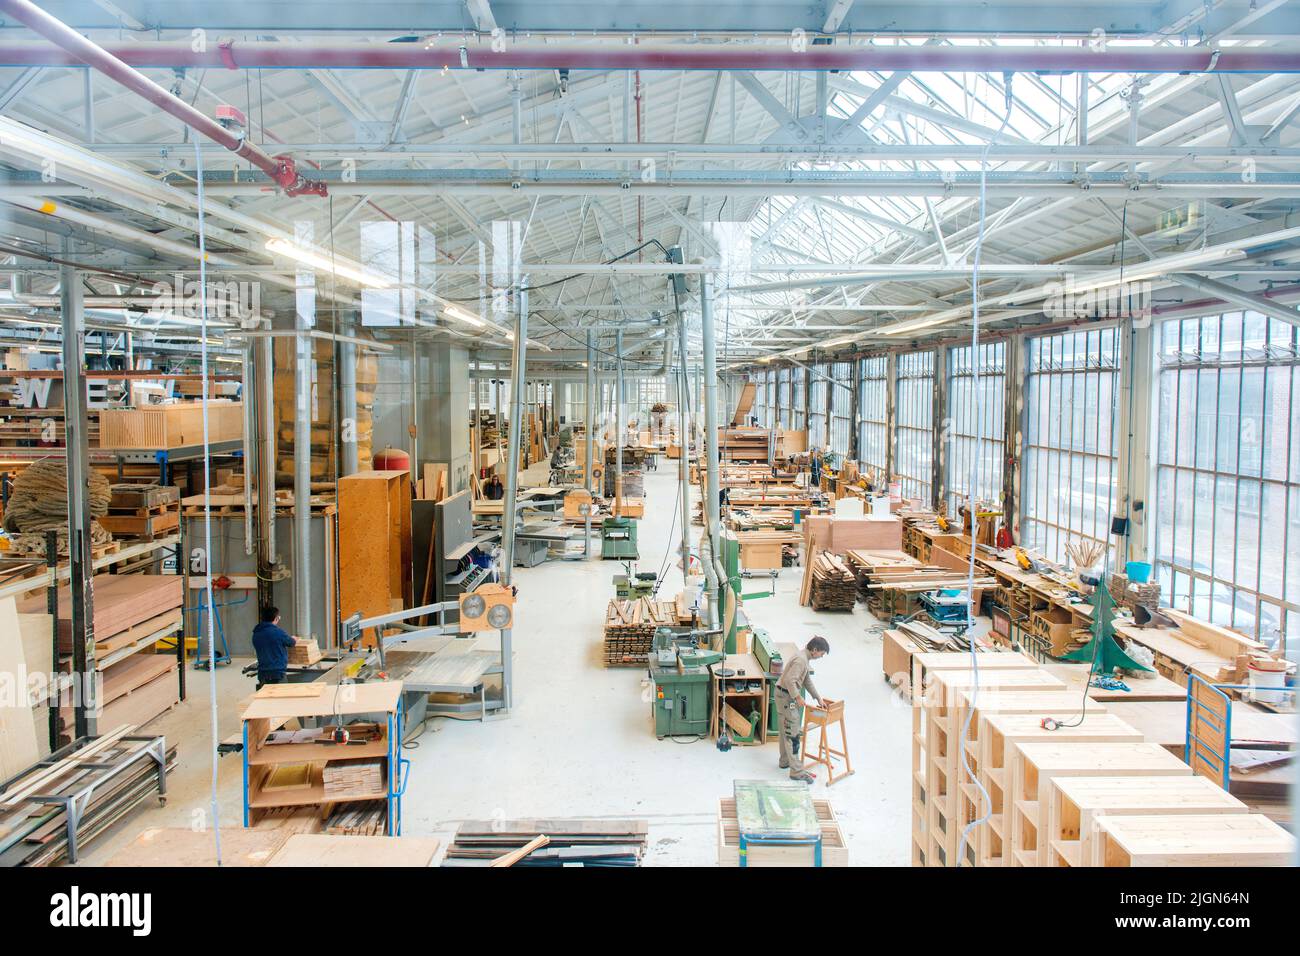 Eindhoven, Netherlands. Working wood workshop of the Piet Hein Eek interior design branche. An enterprise where skilled craftsmen and women find sustainable, high quality work and income. Stock Photo